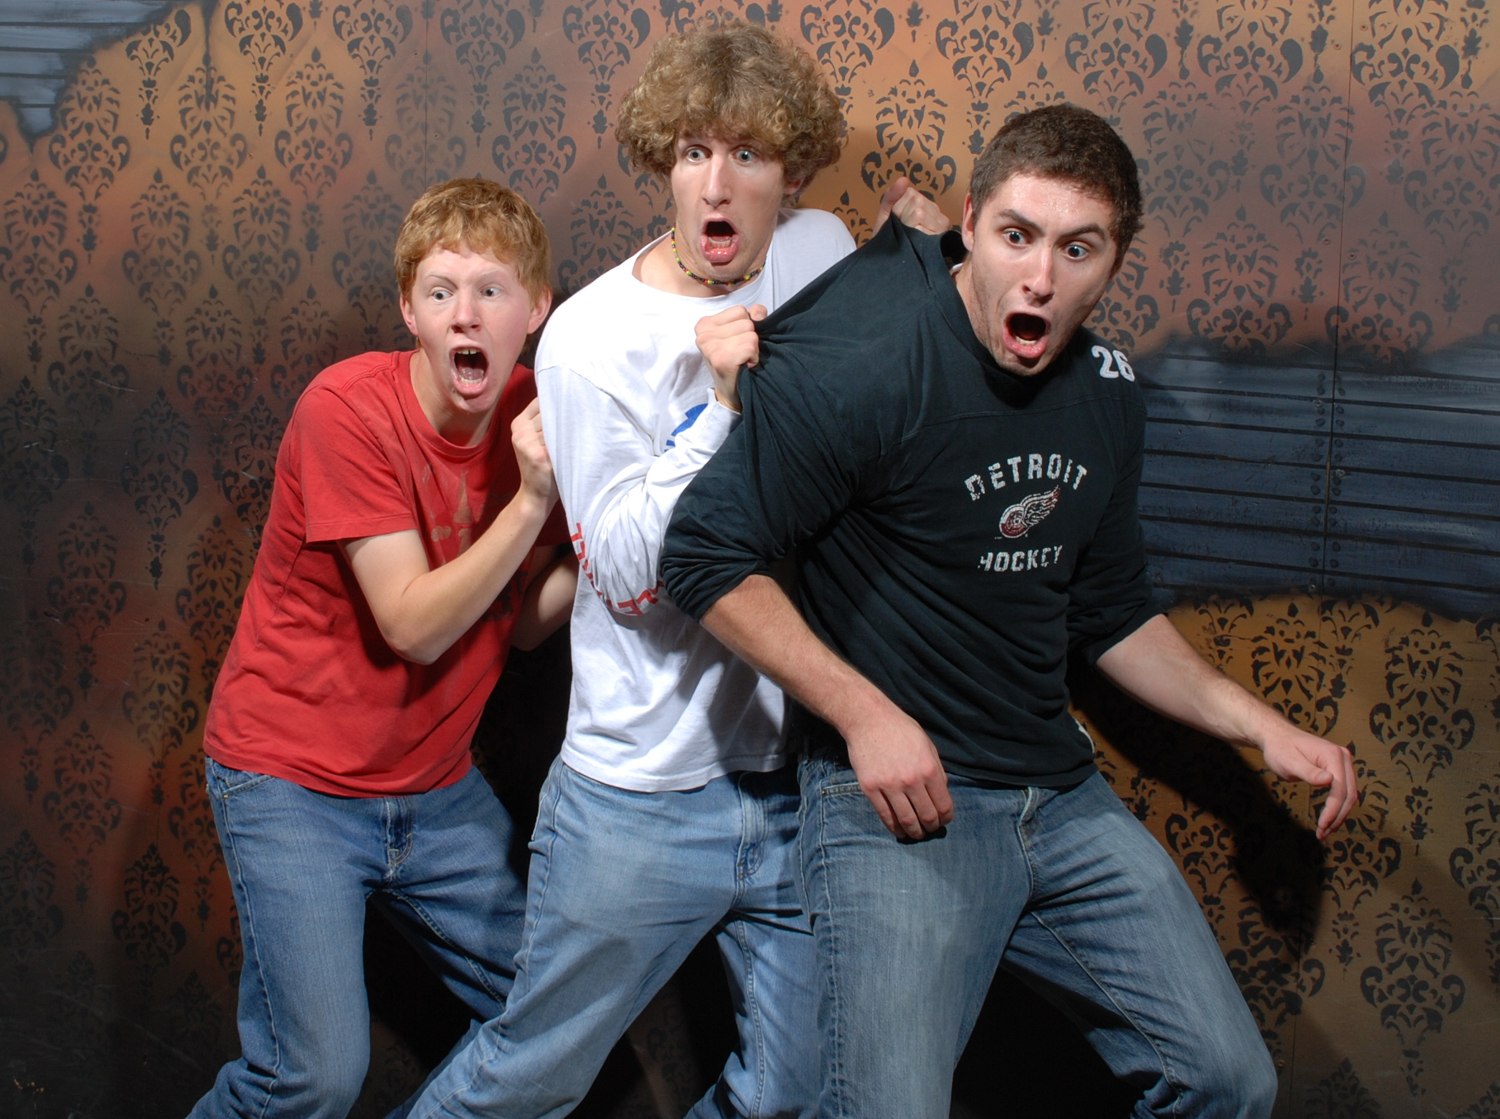 Faces of fear: 34 amazing haunted house reactions